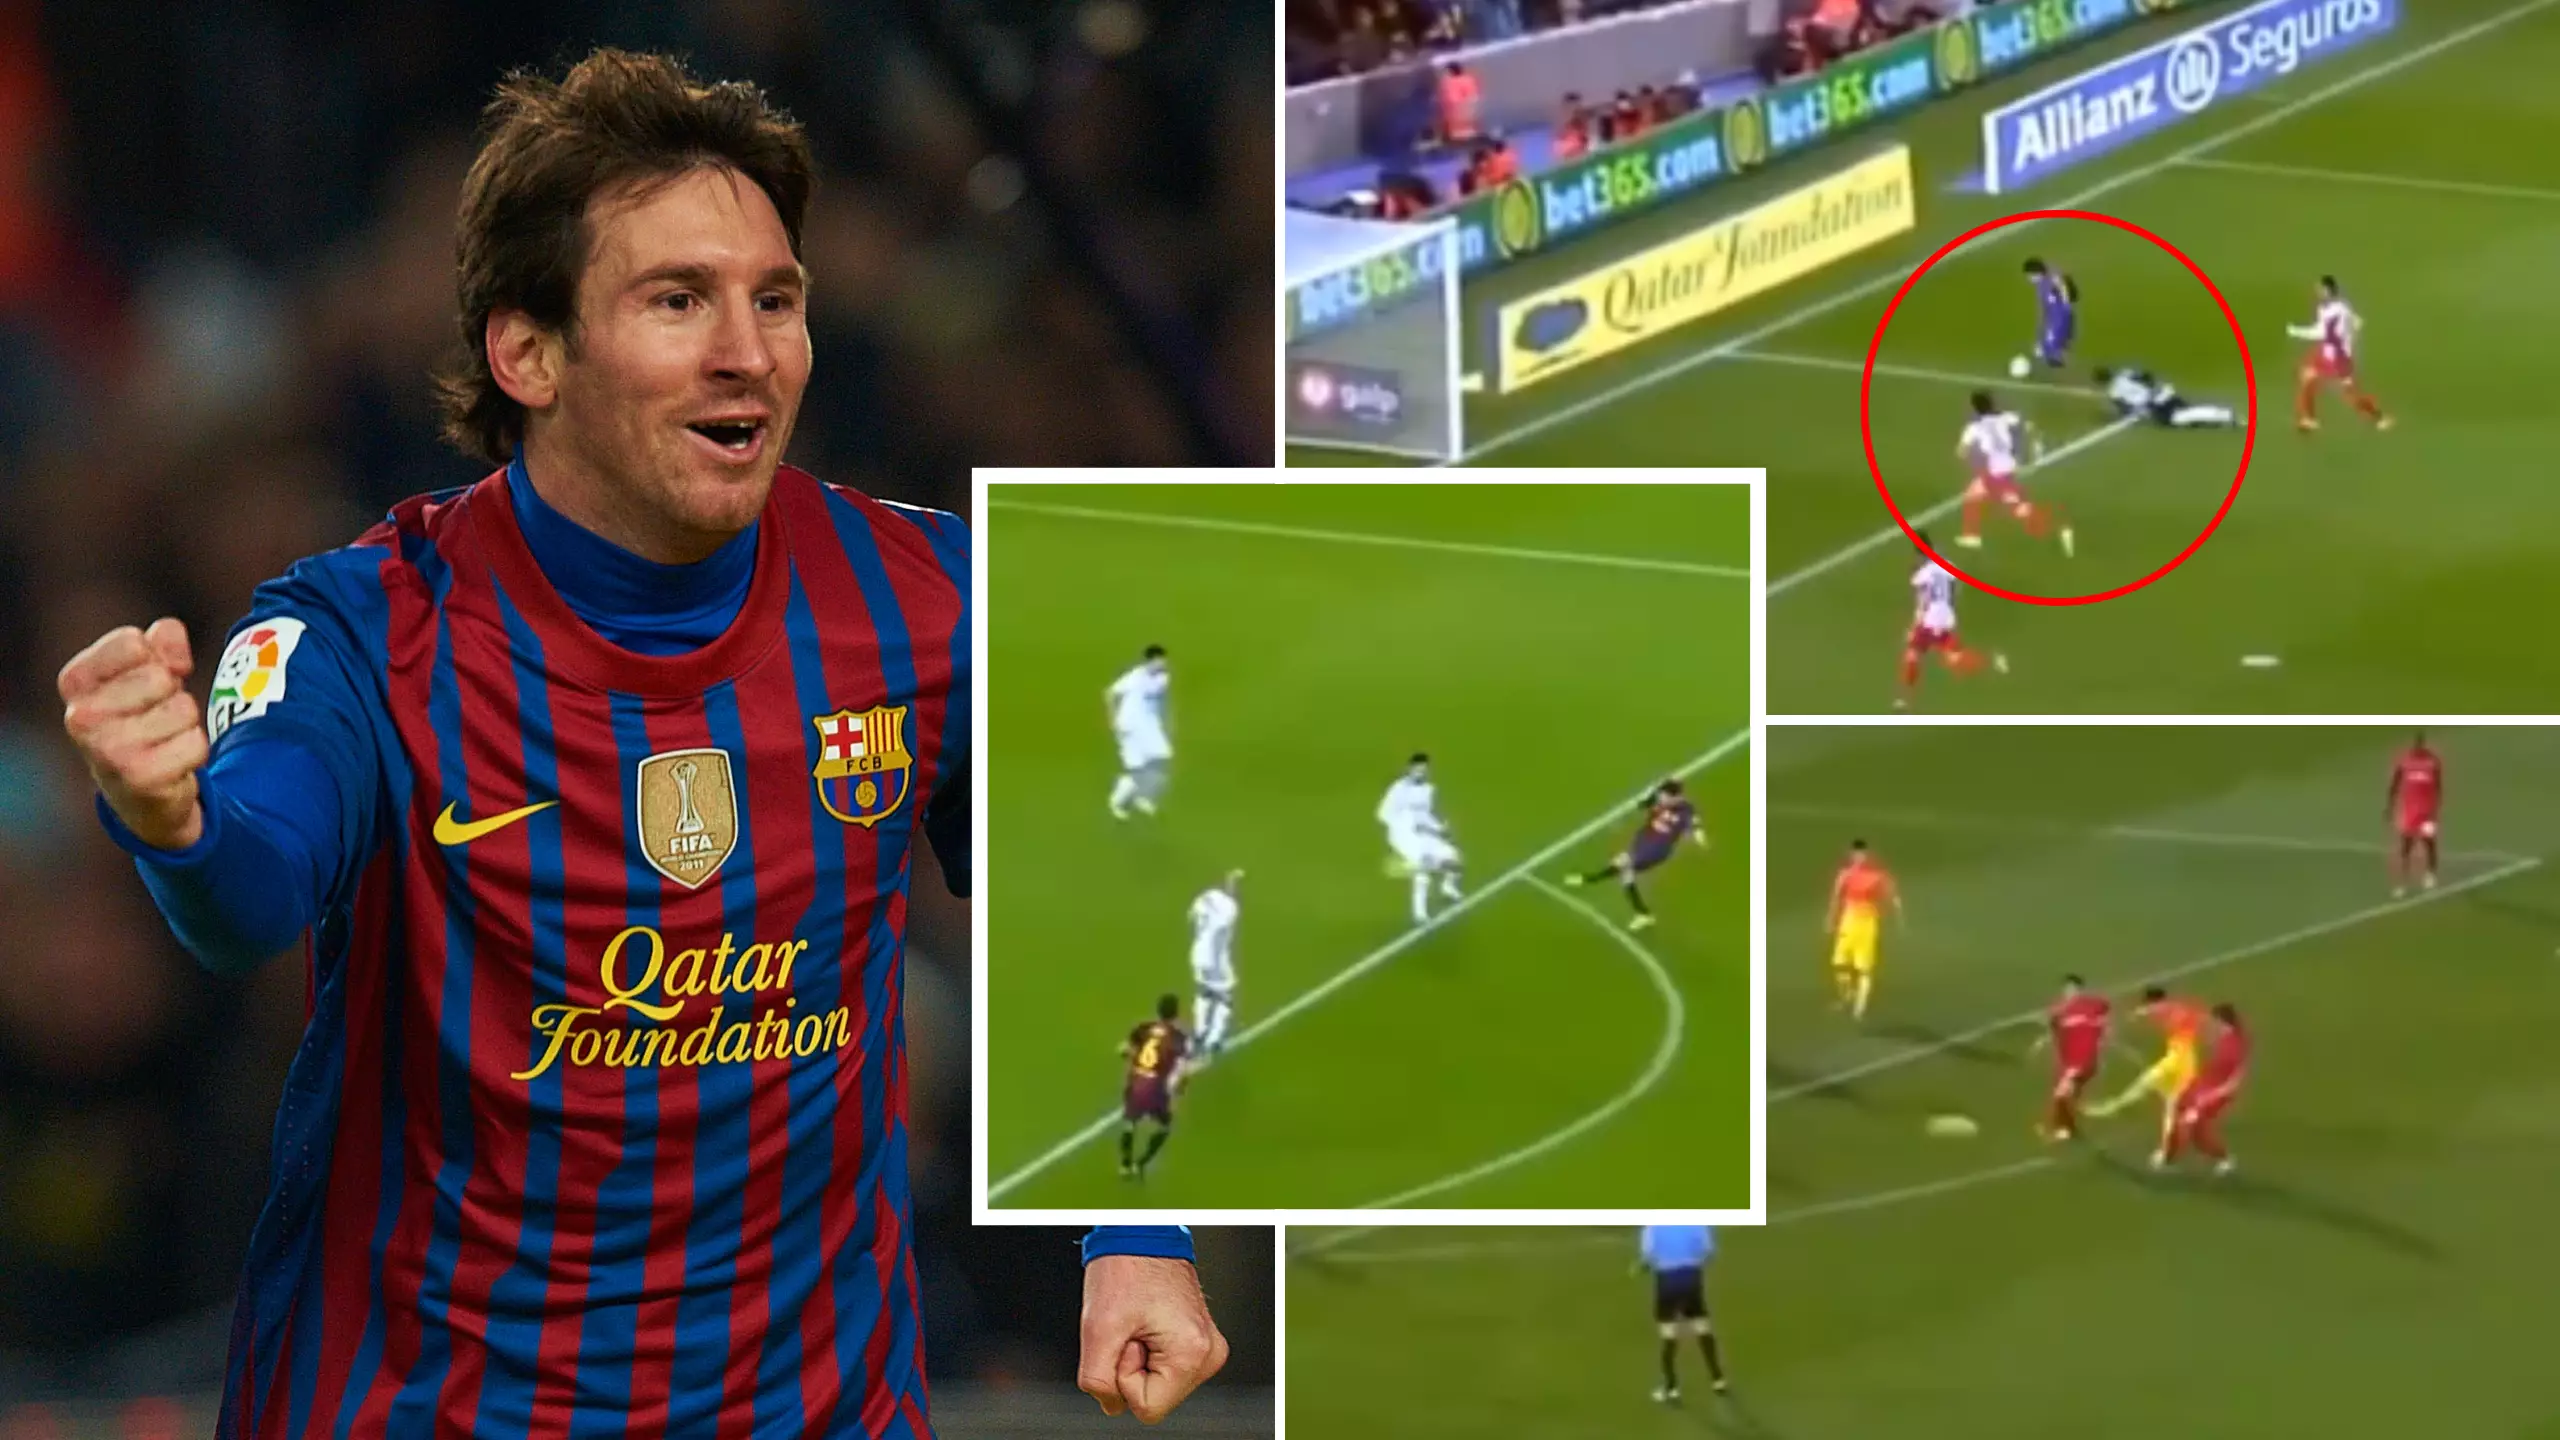 Video Of All 91 Lionel Messi Goals In 2012 Proves He's Superhuman, Unlike Any Other Footballer Ever